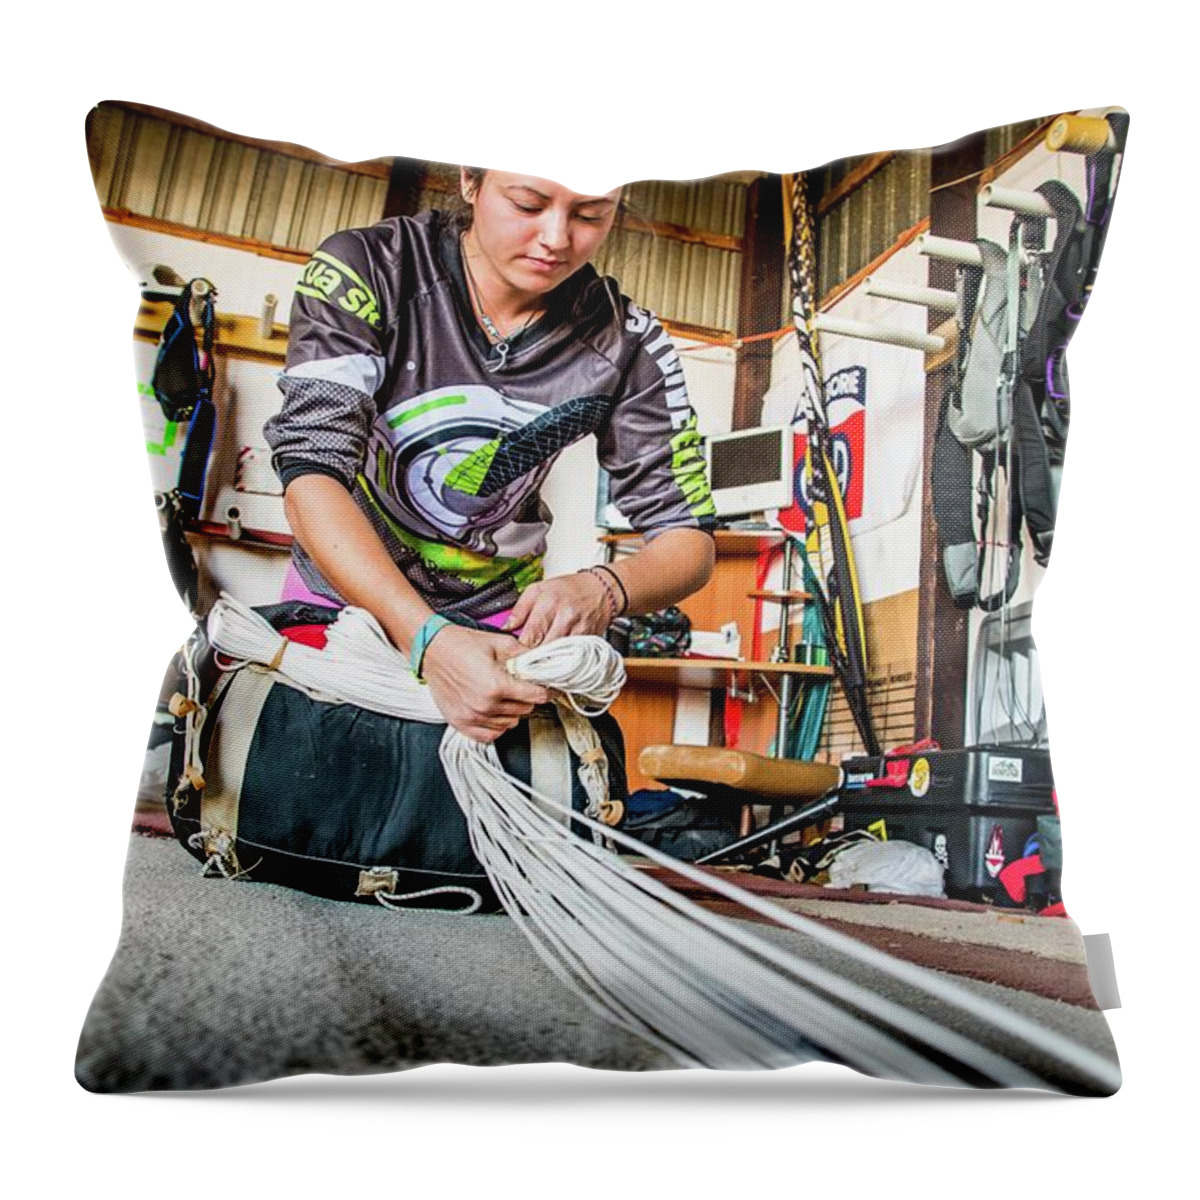 Rigger Throw Pillow featuring the photograph Missy the Rigger by Larkin's Balcony Photography